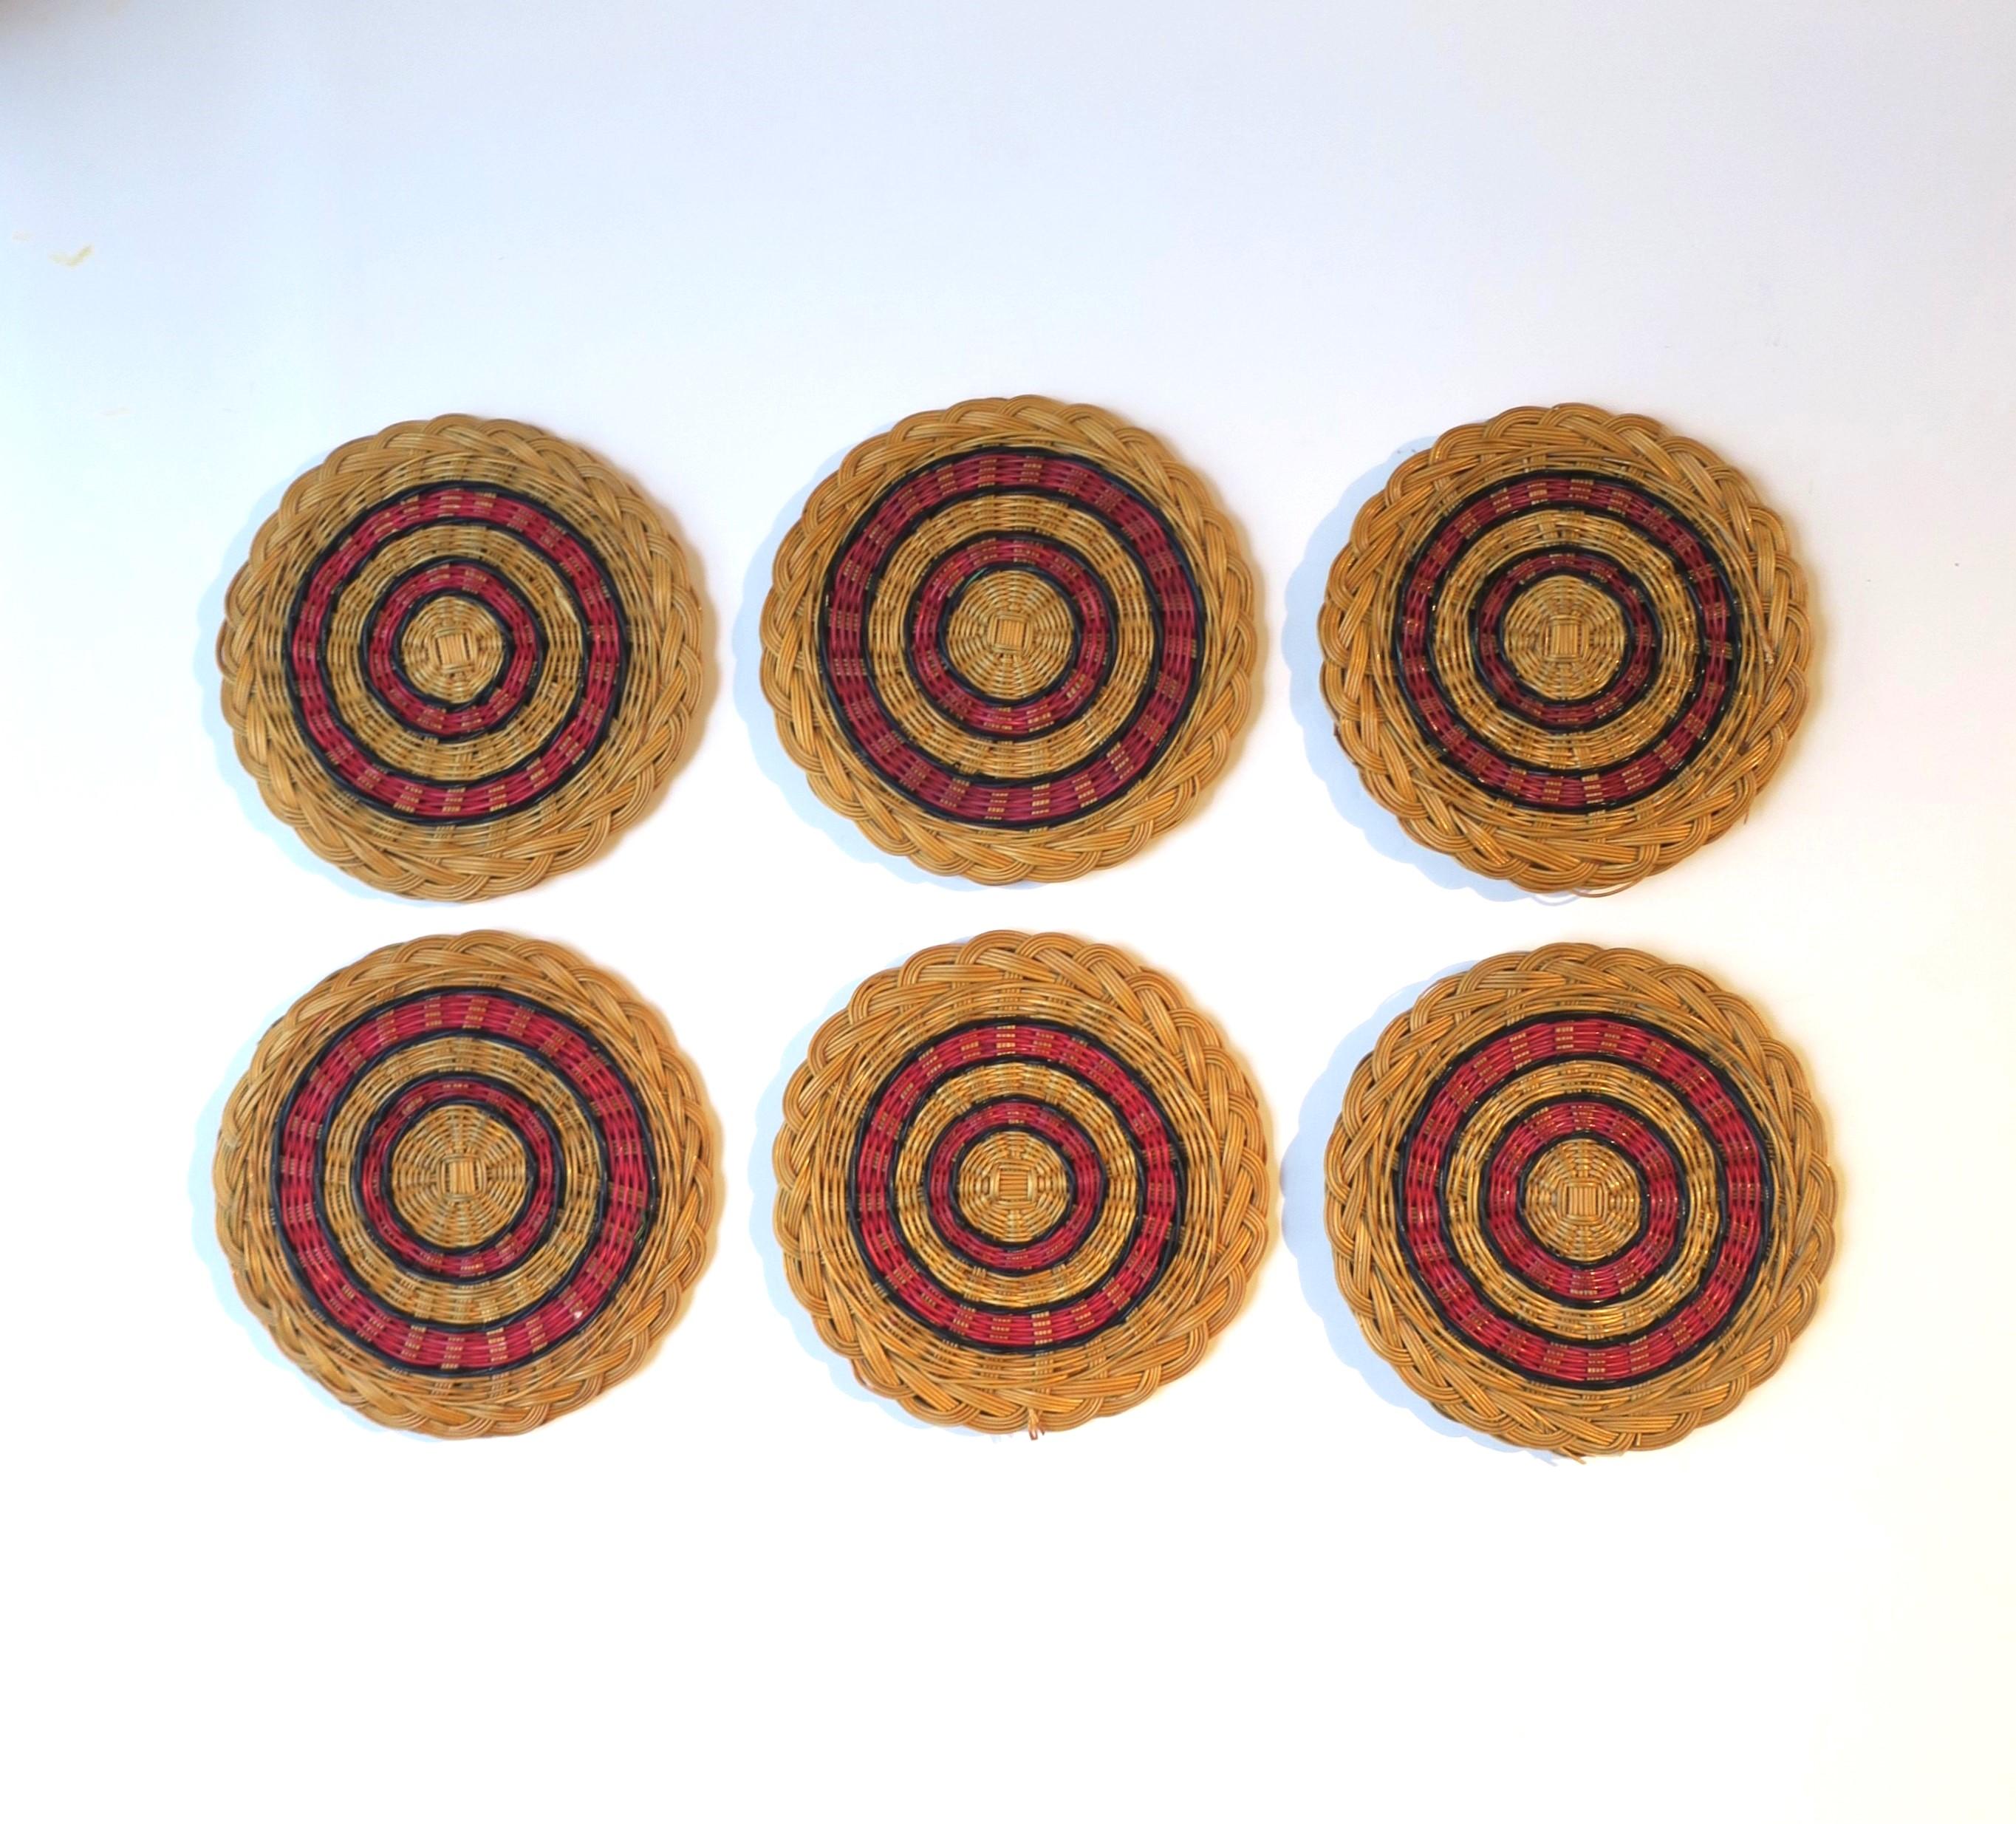 A vintage set of six (6) wicker drinks cocktails coasters, in the American Classical style, circa mid-20th century, 1960s. Coasters are a natural tan hue, with braided edge, and a red and blue circular design. A great addition to any bar, bar cart,